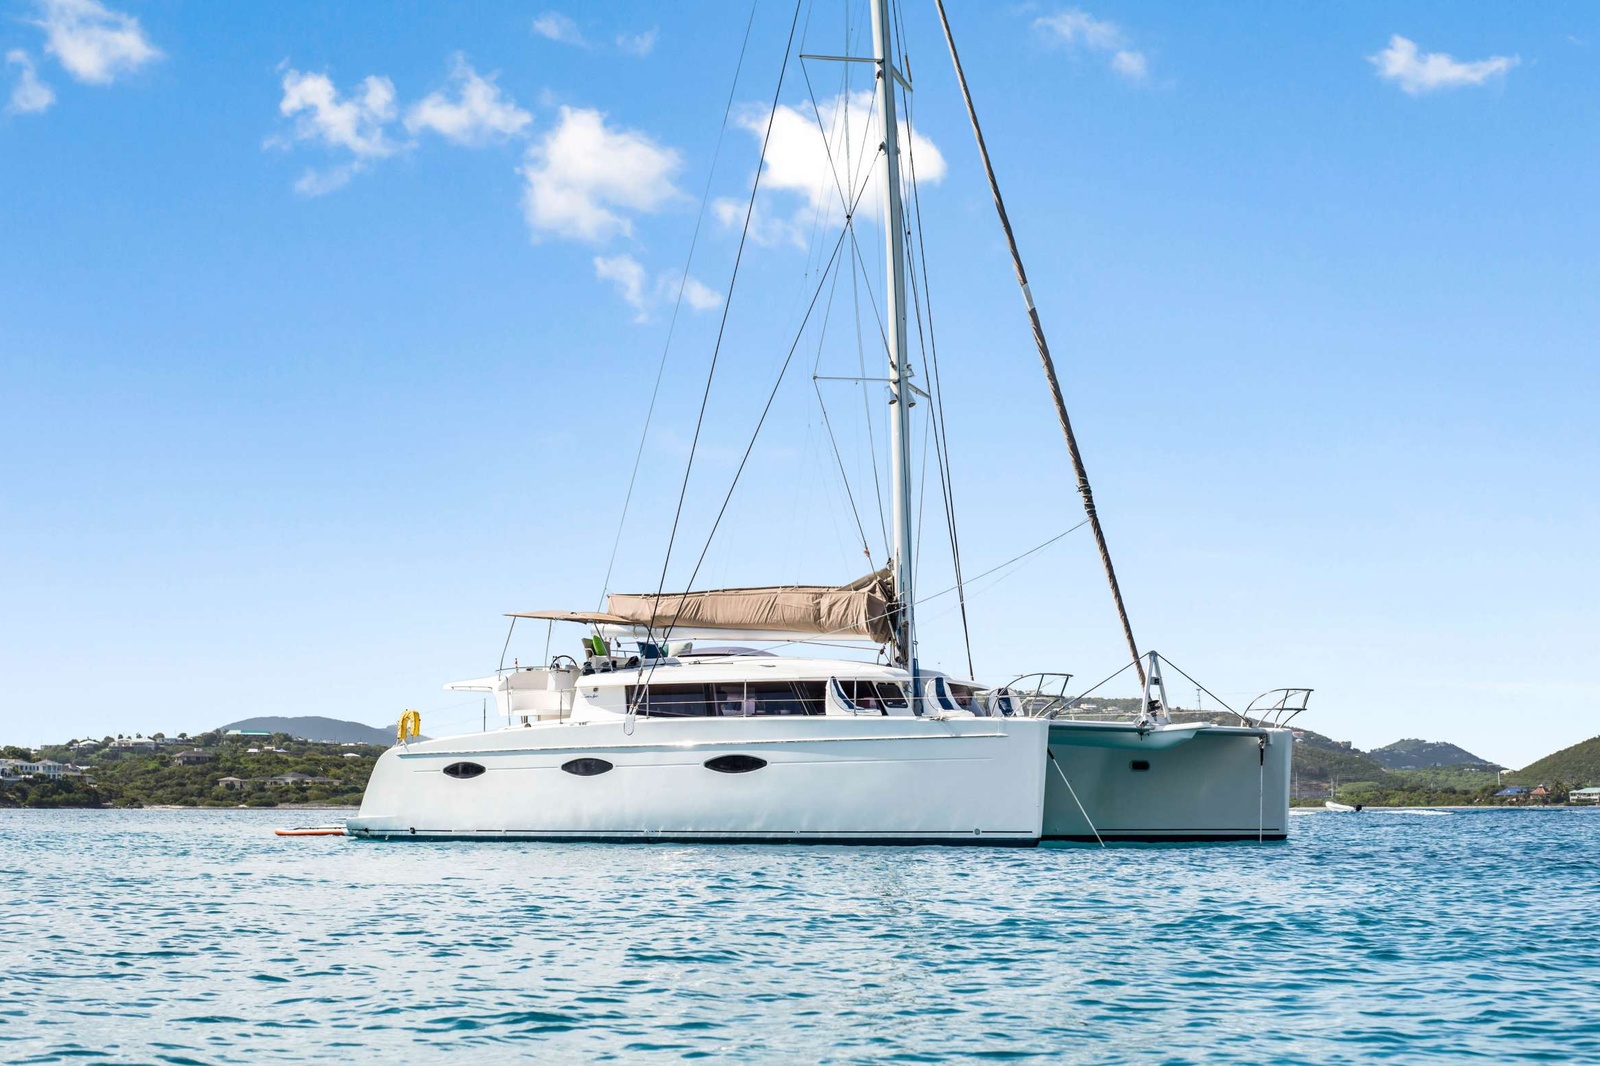 Refurbished in 2022, this 2013 59' Fountaine Pajot sailing catamaran, is truly exceptional. Perpetual Blue elevates the luxury of sailing charter yachts with her five spacious queen cabins, each featuring private ensuite baths, electric heads, vanity, and separate showers. Both the cabins and common areas of the yacht are well-lit and ventilated, complemented by custom full air-conditioning. The salon comfortably accommodates all guests for lounging or dining, while the exterior provides a memorable alfresco dining experience. The yacht features unique top deck seating and a villa-style aft lounge area, offering numerous lounging spaces for group gatherings or secluded relaxation, allowing one to fully absorb the Caribbean atmosphere on her charters.

TOYS: 2 Stand Up Paddle Boards, Snorkeling Gear, 1 2-Person Kayak, Sea Scooters, Floats & Onshore Games.